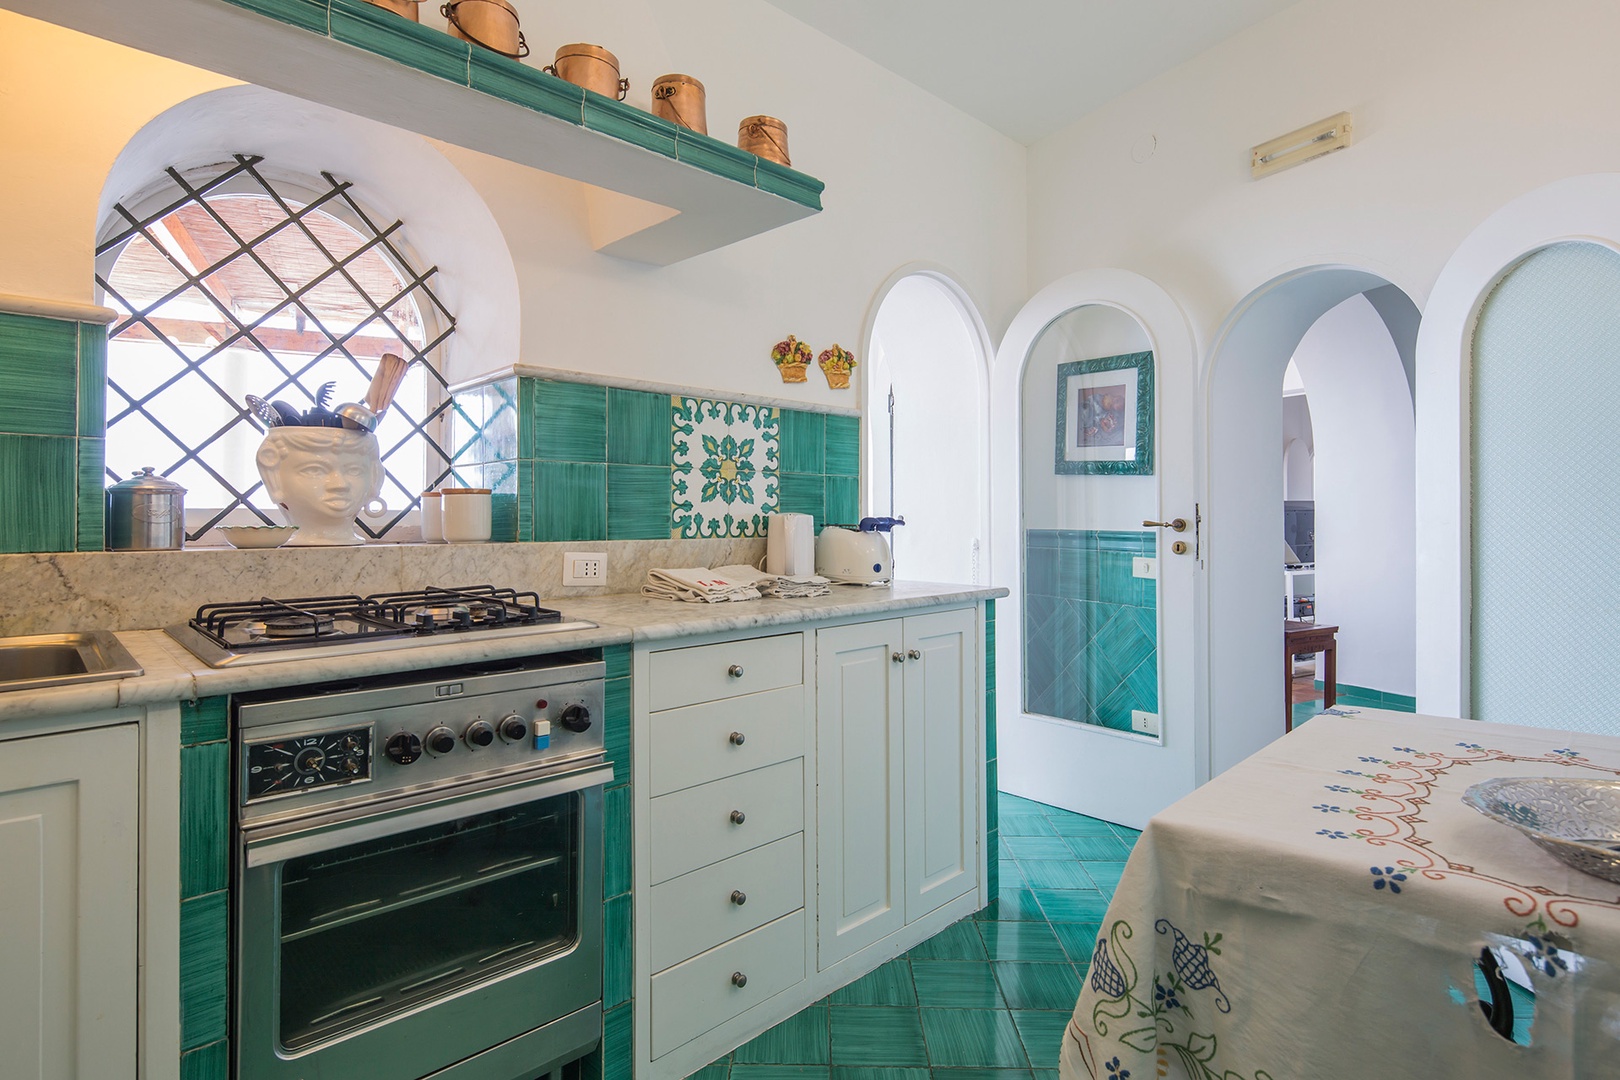 Pretty turquoise tiles carry throughout the dining and fully equipped kitchen.